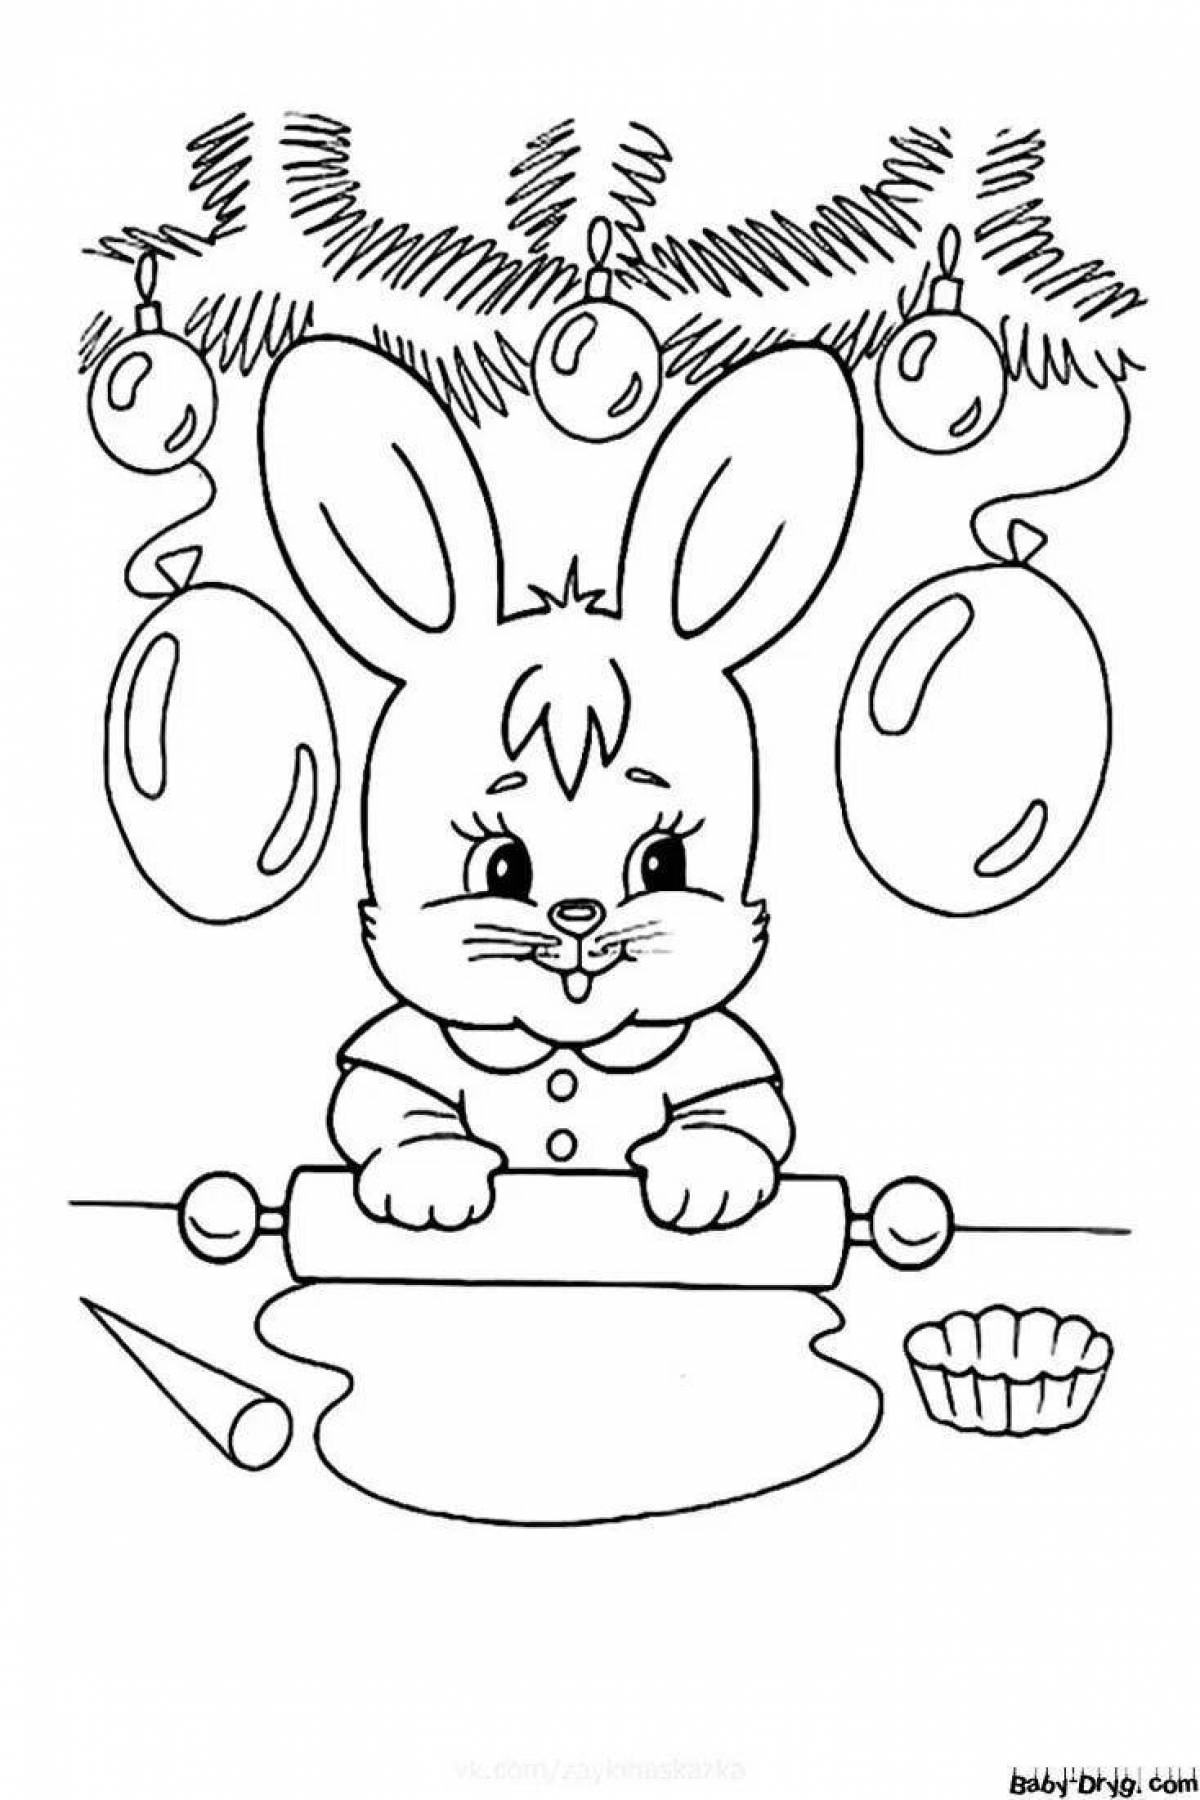 Live coloring rabbit with a gift